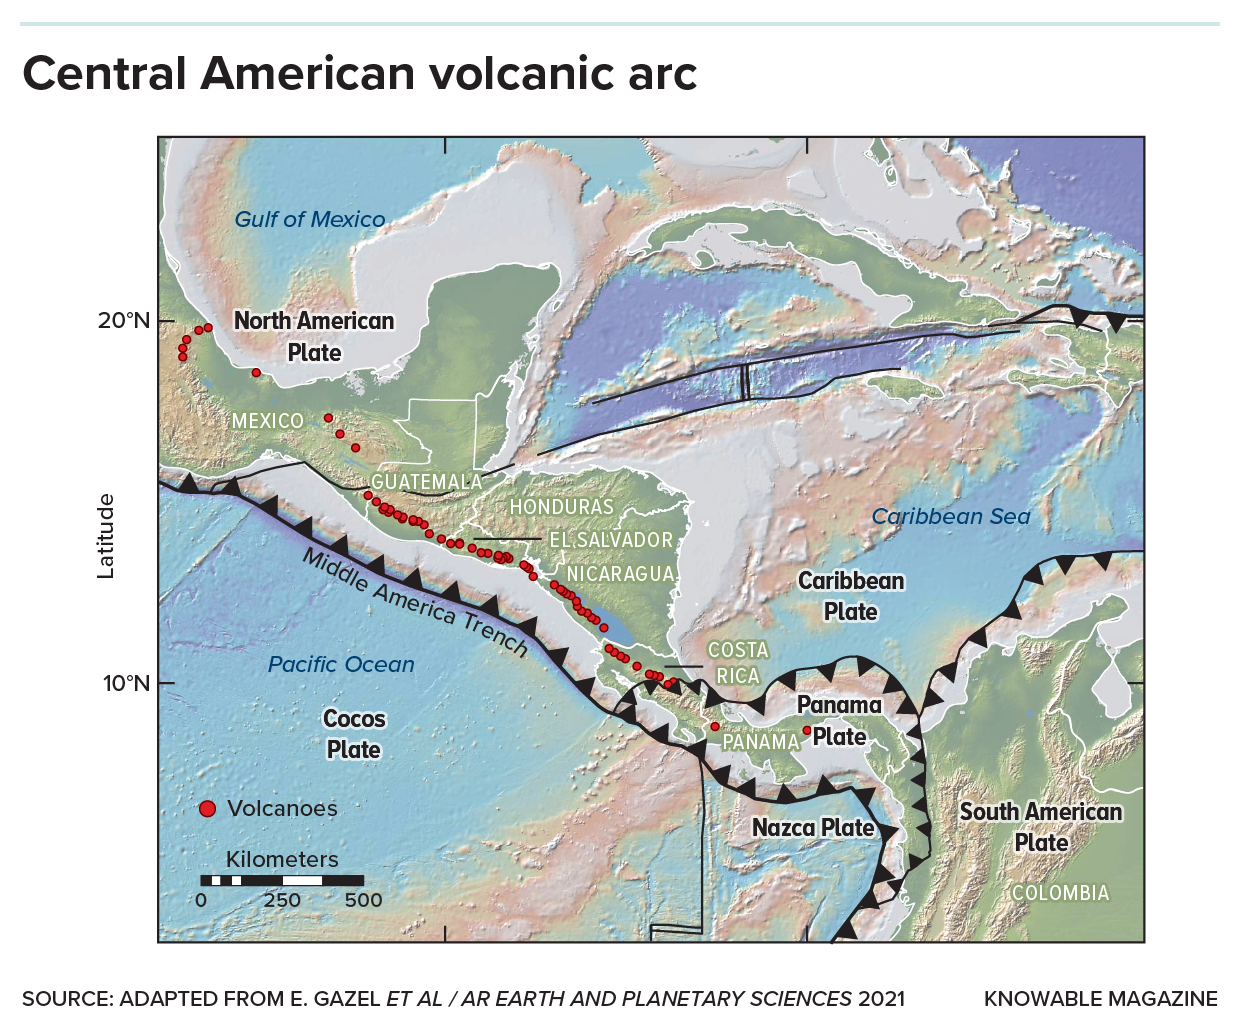 Map of the Central American isthmus showing the tectonic plates and the Central American volcanic arc.